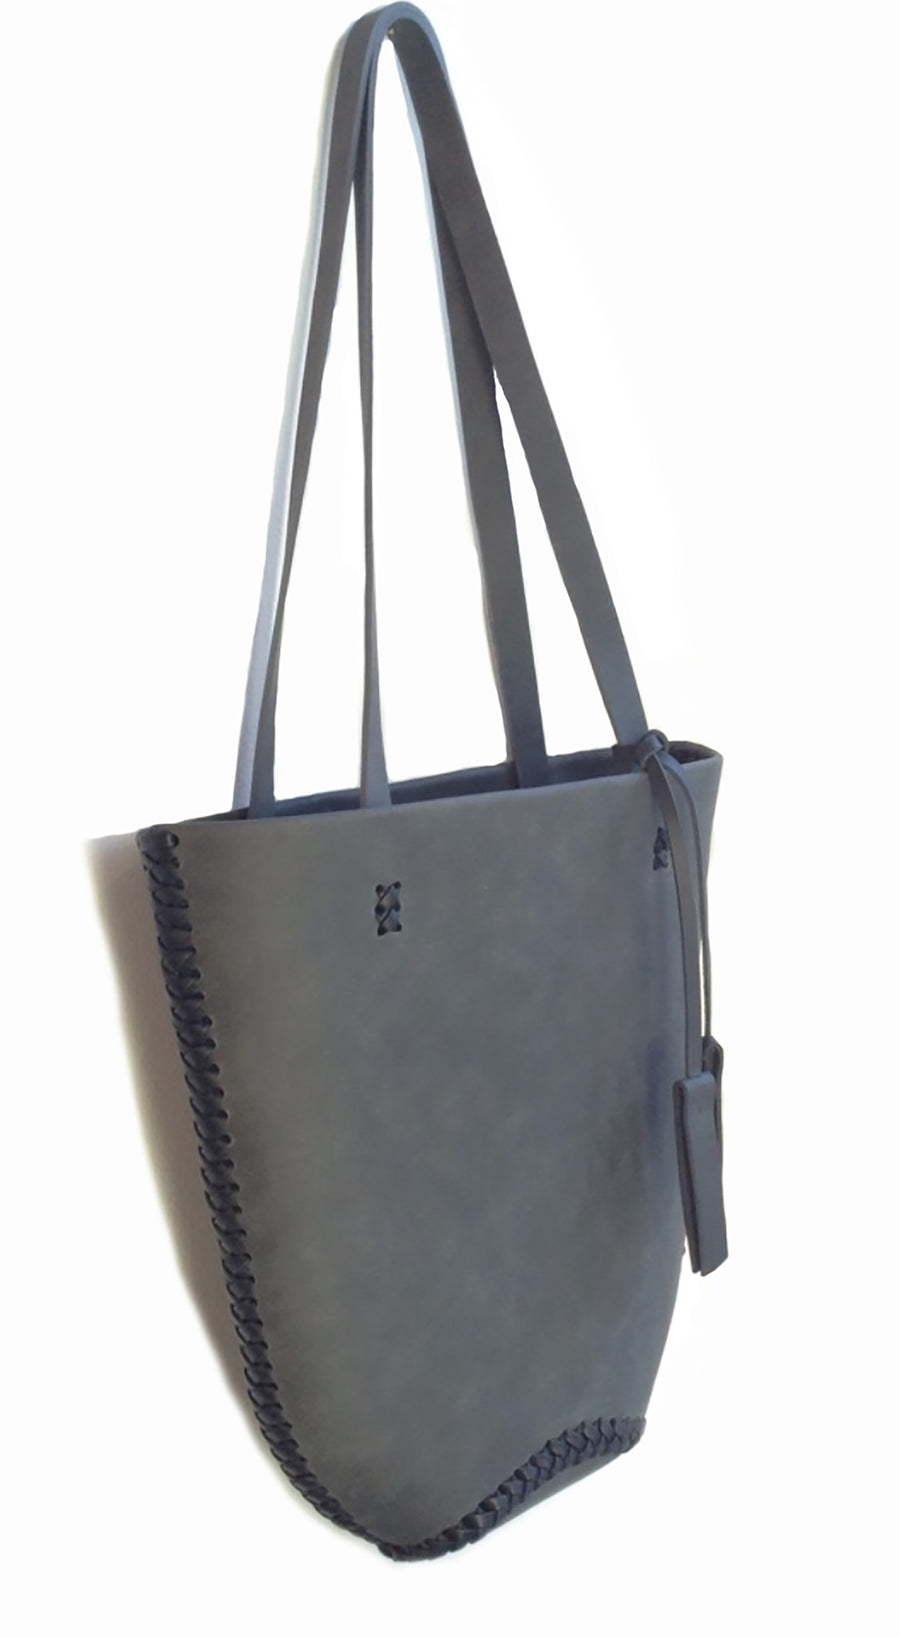 Gray Grey Horse Vegetable Tanned Leather Mini Tote Wendy Nichol Handbag bag Purse Designer Handmade in NYC New York City  braided Basket Everyday Simple Durable Light Medium Tote Eco Leather High Quality Leather